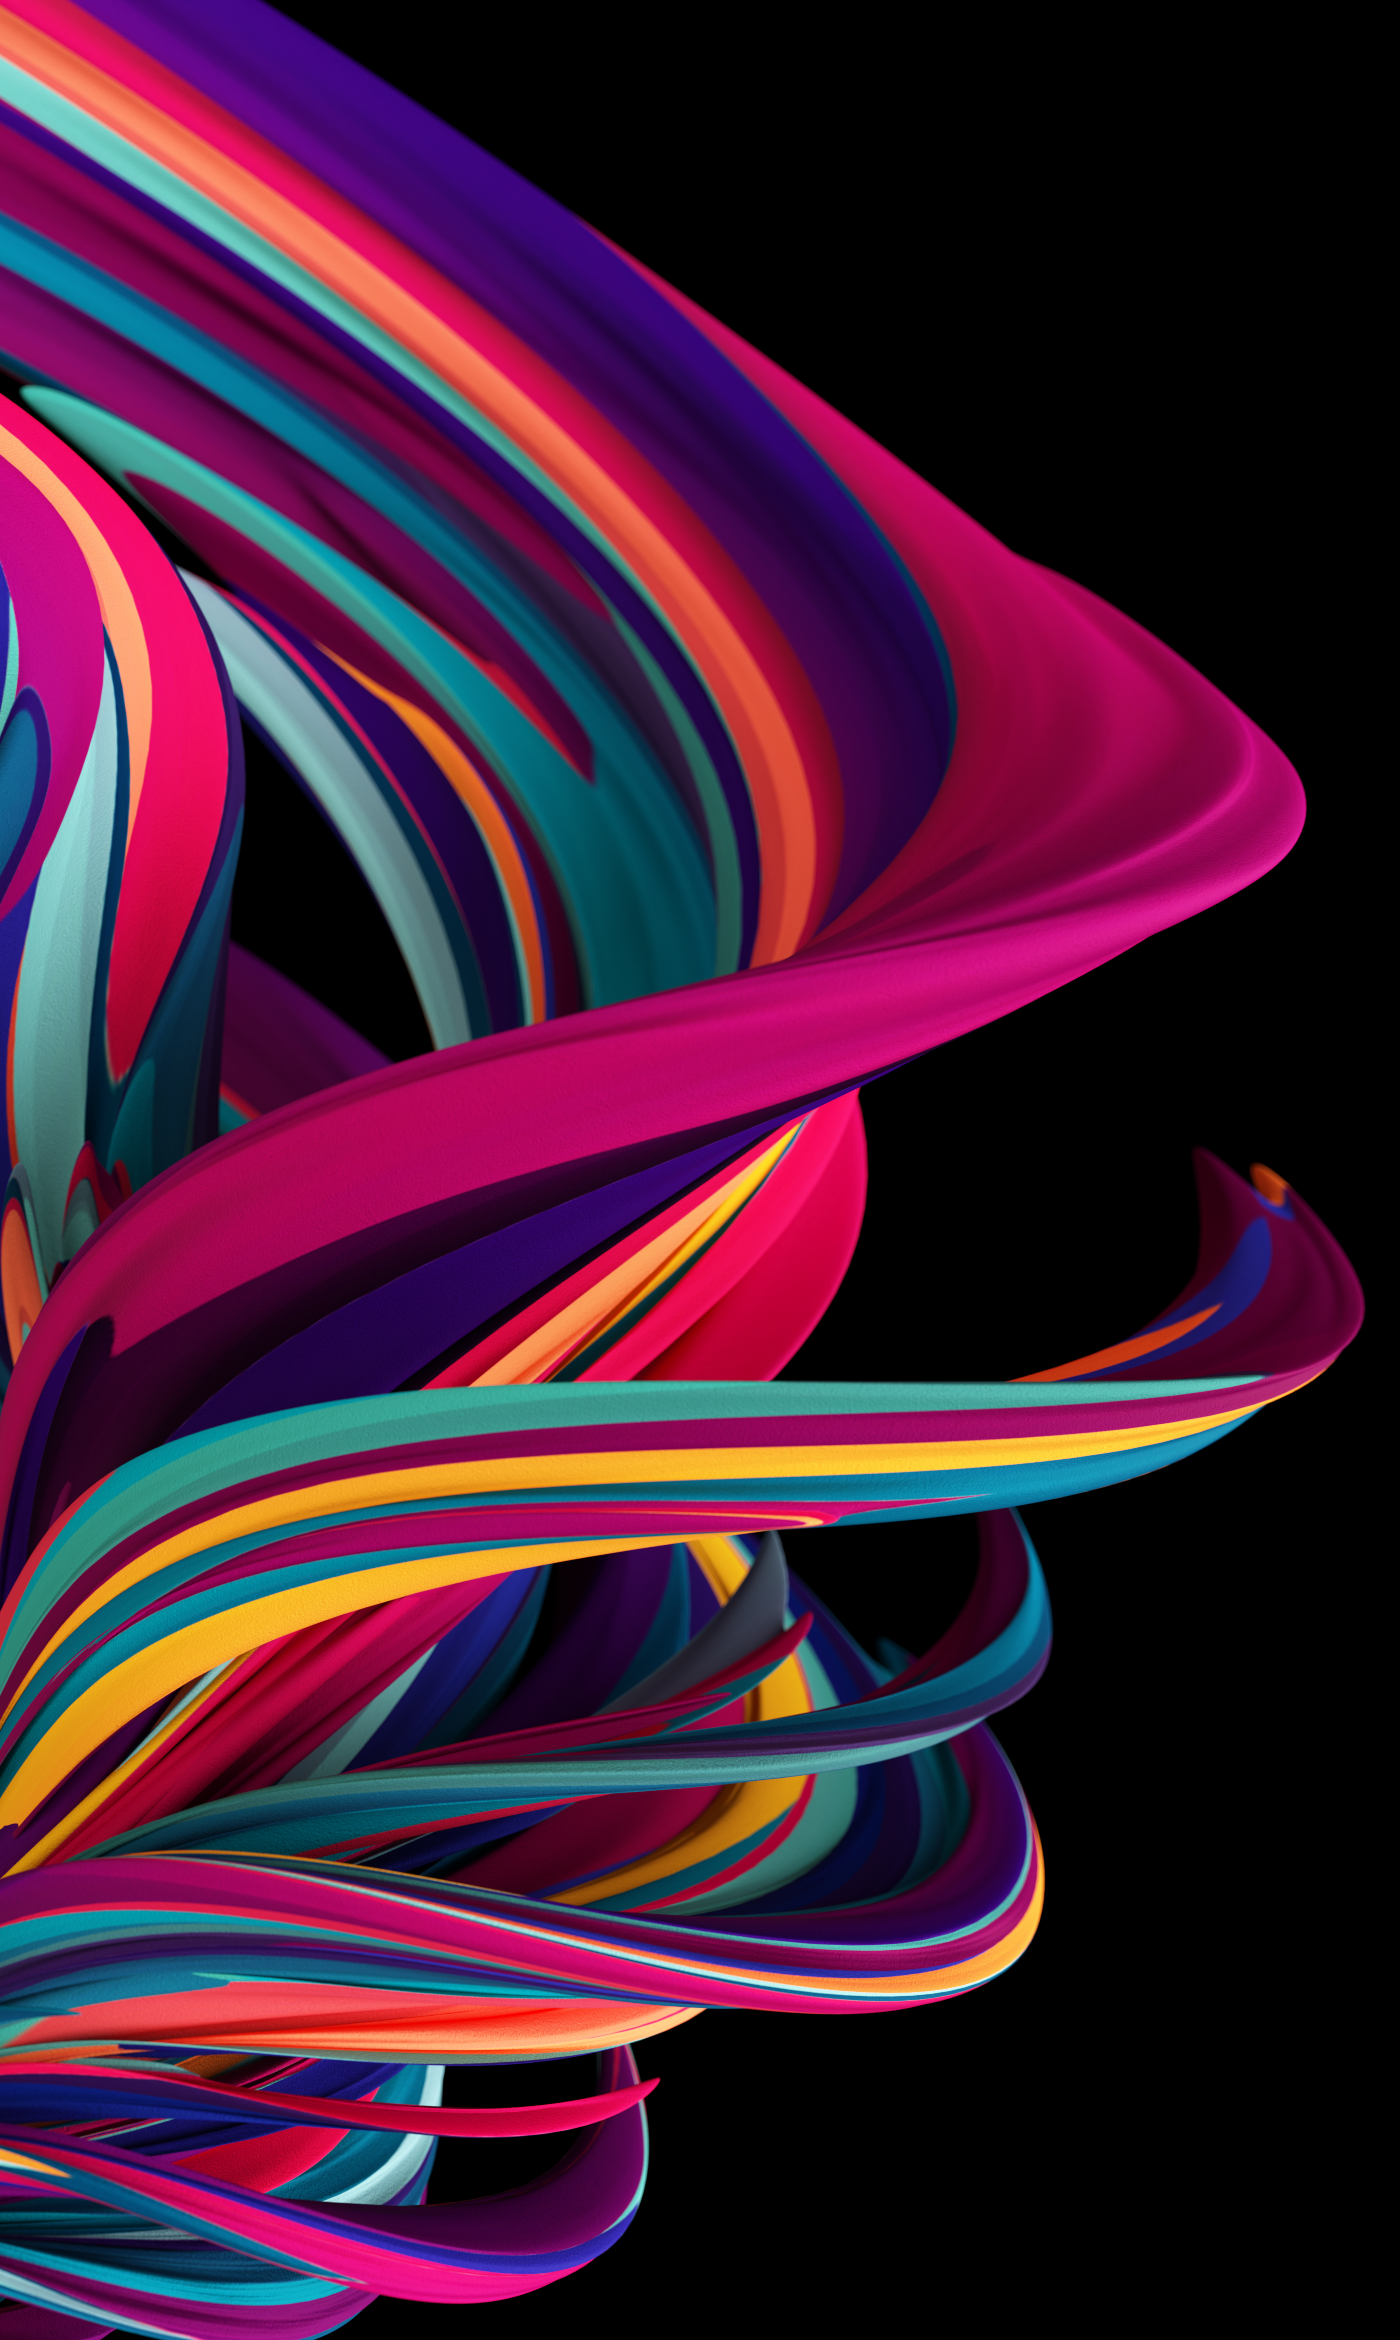 Curved Lines Series 1.0 on Behance172f1d77426589.5c9a3f00deb28.png